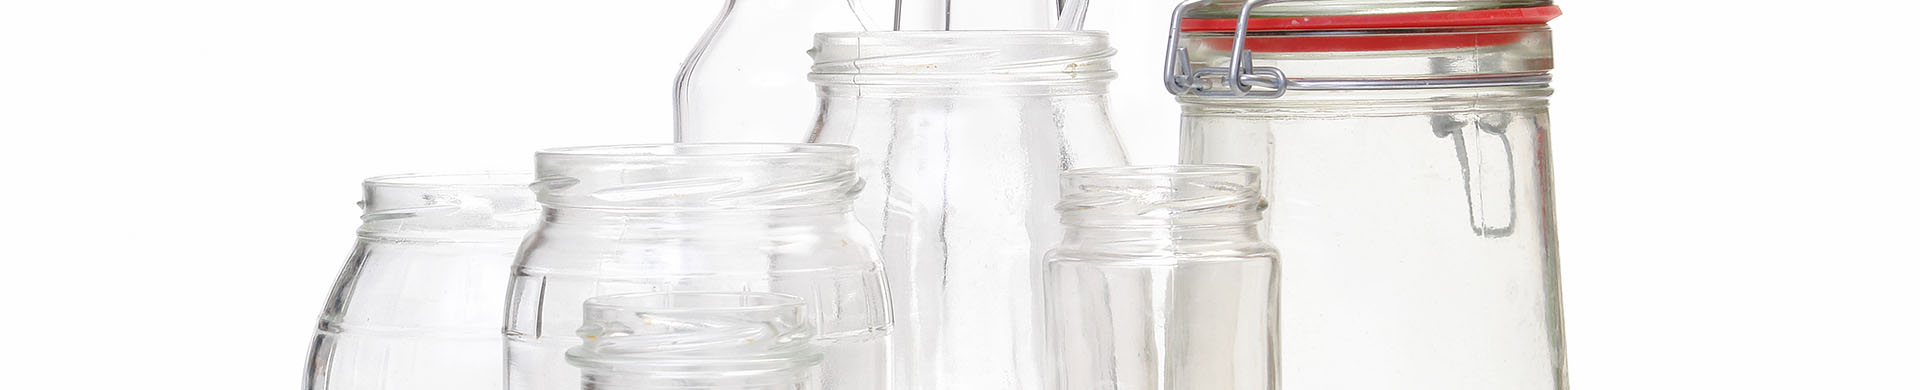 Group of Glass Jars and Bottles Ready for Reuse